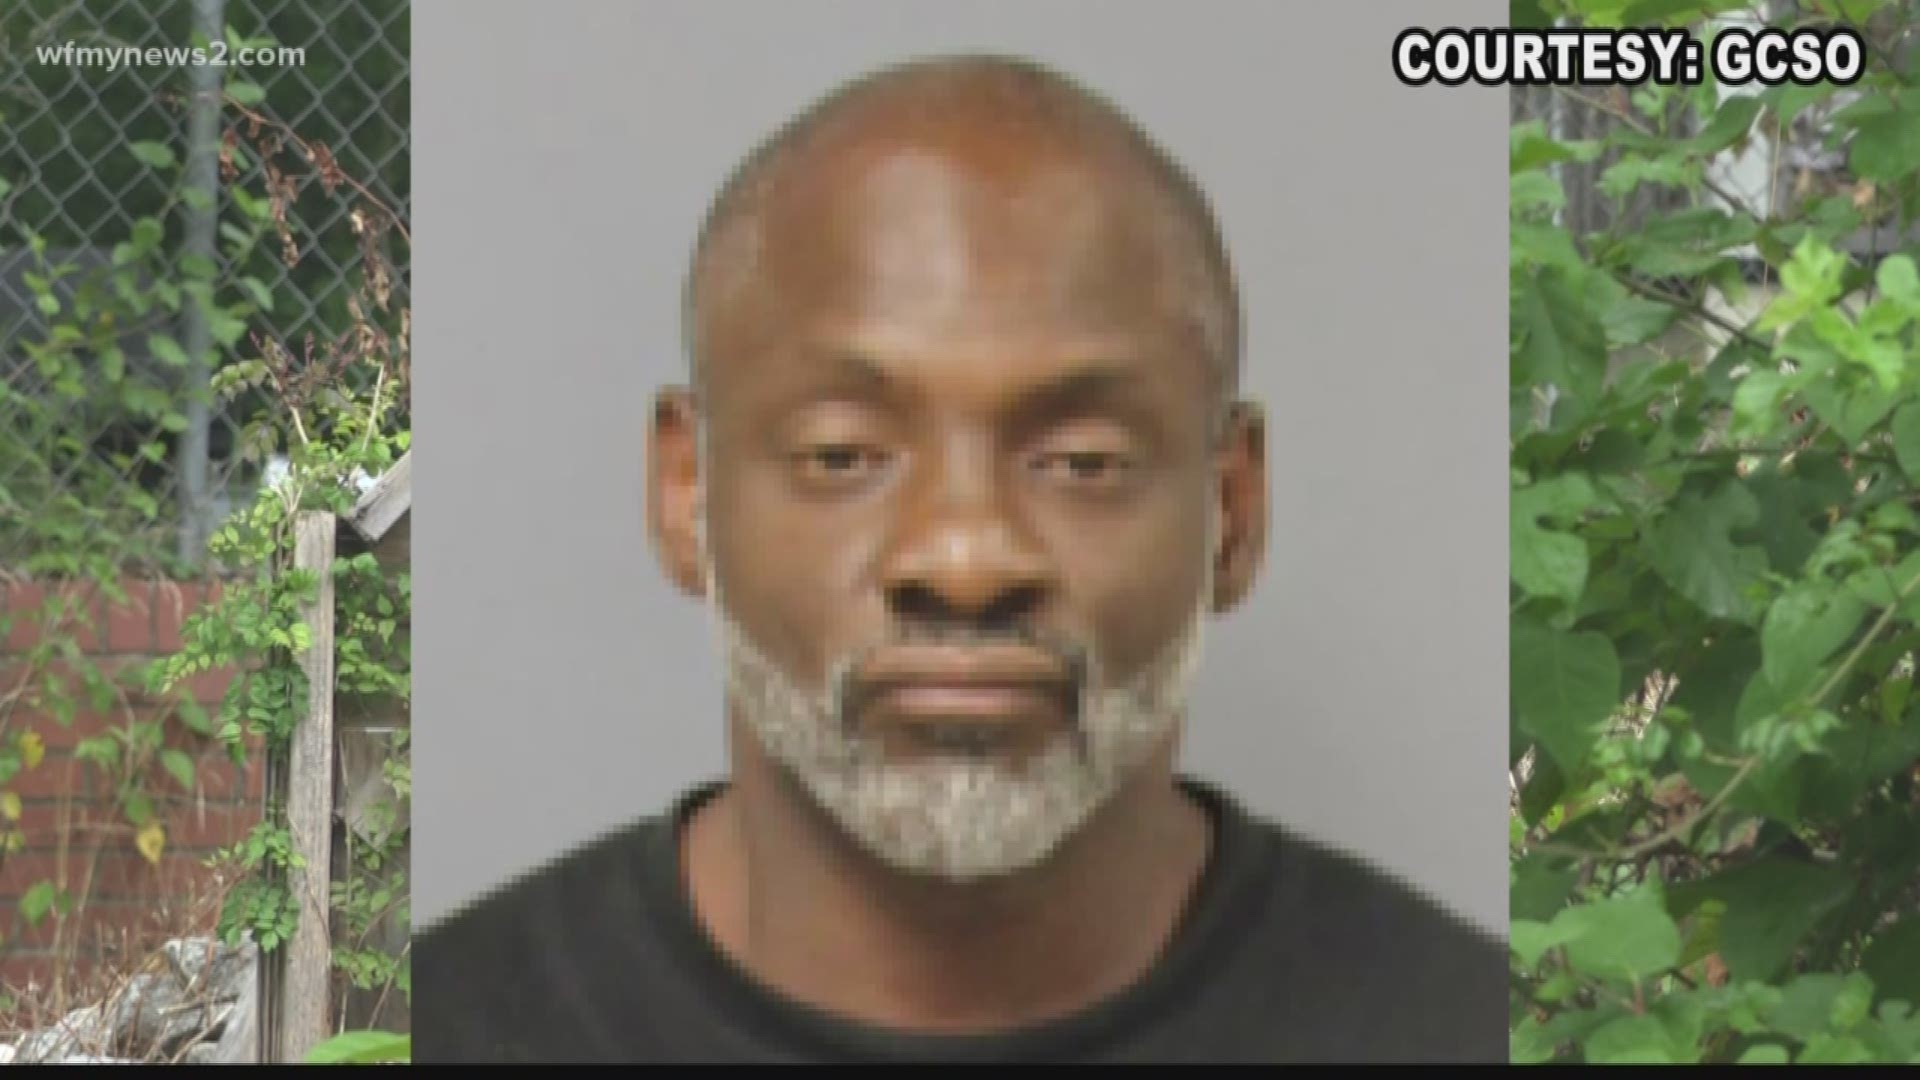 High Point Police actually caught the suspect while WFMY News 2 was interviewing the family. Police are pressing charges against 49-year-old Mark Reaves for larceny.